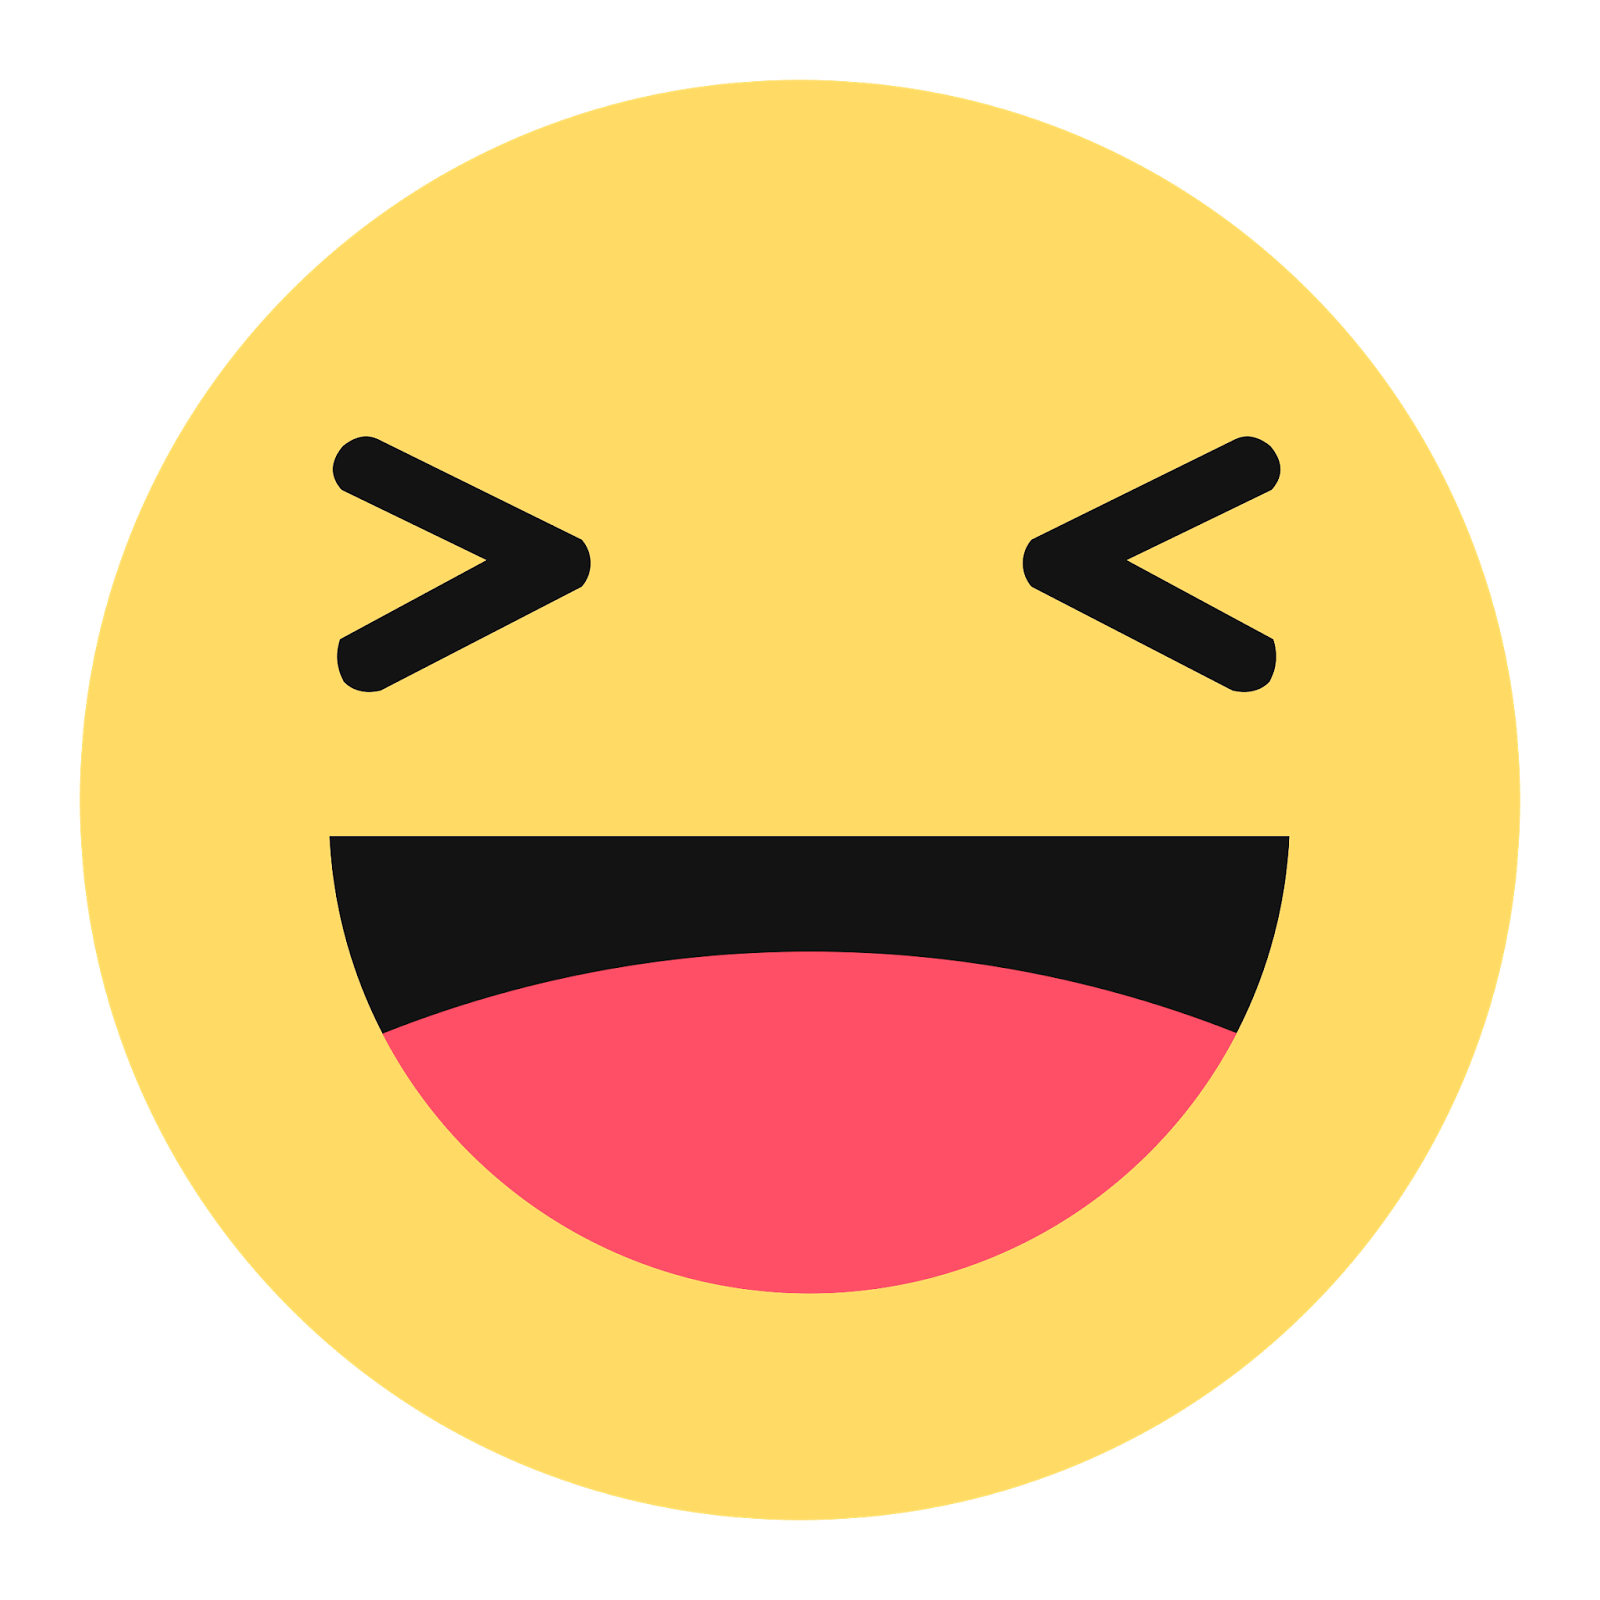 Download Emoticon Button Facebook Like Download Free Image Hq Png Image